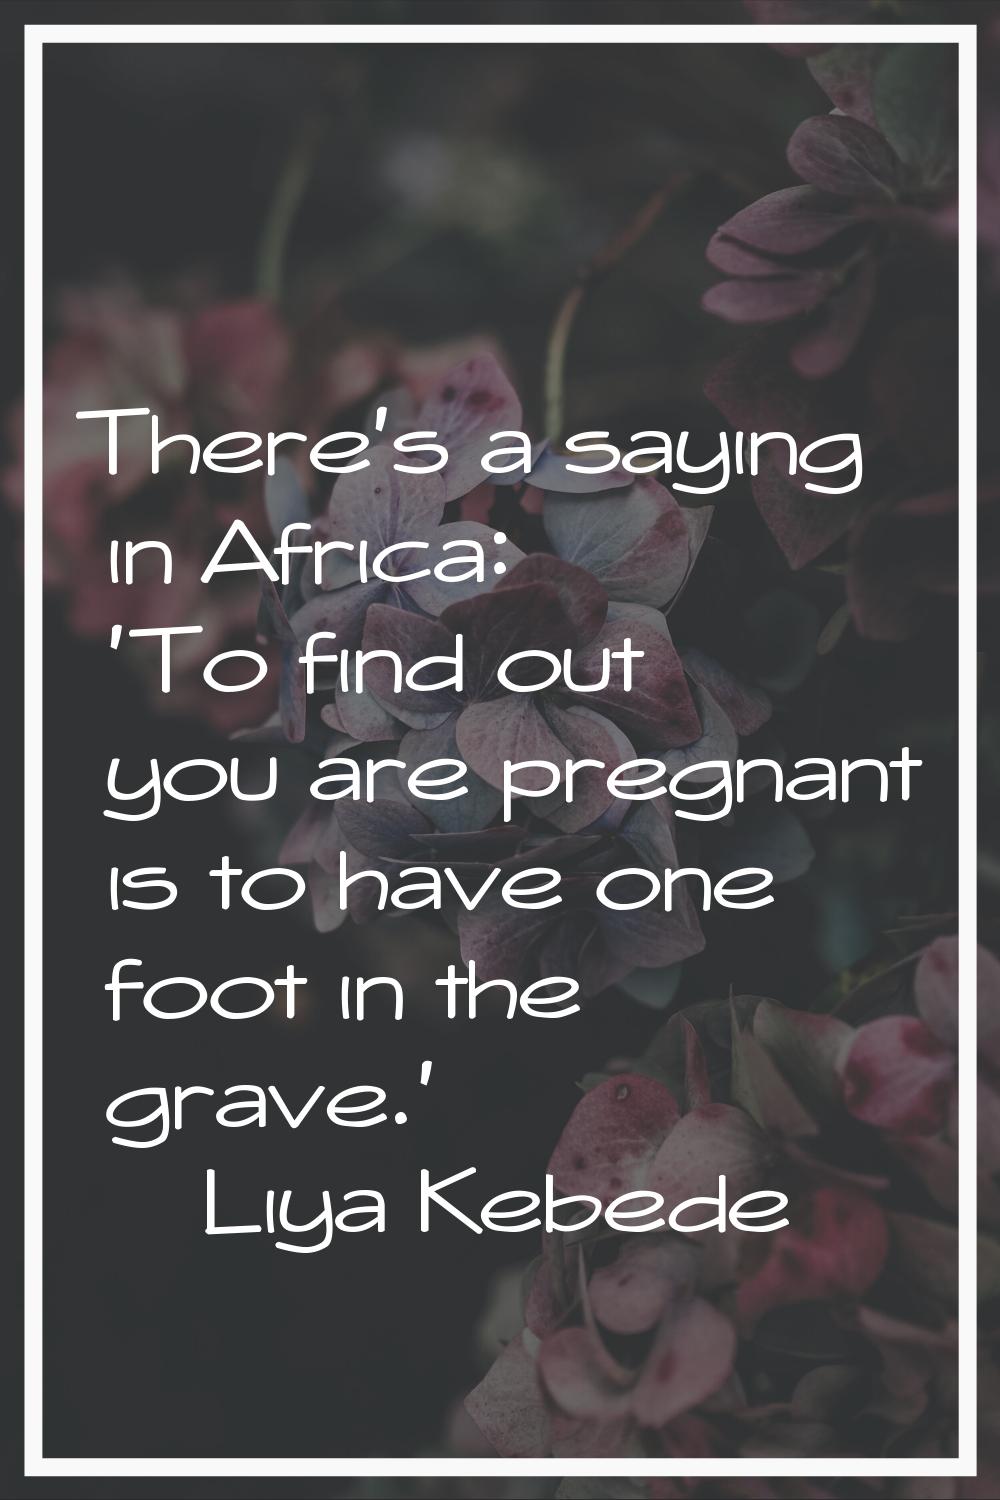 There's a saying in Africa: 'To find out you are pregnant is to have one foot in the grave.'